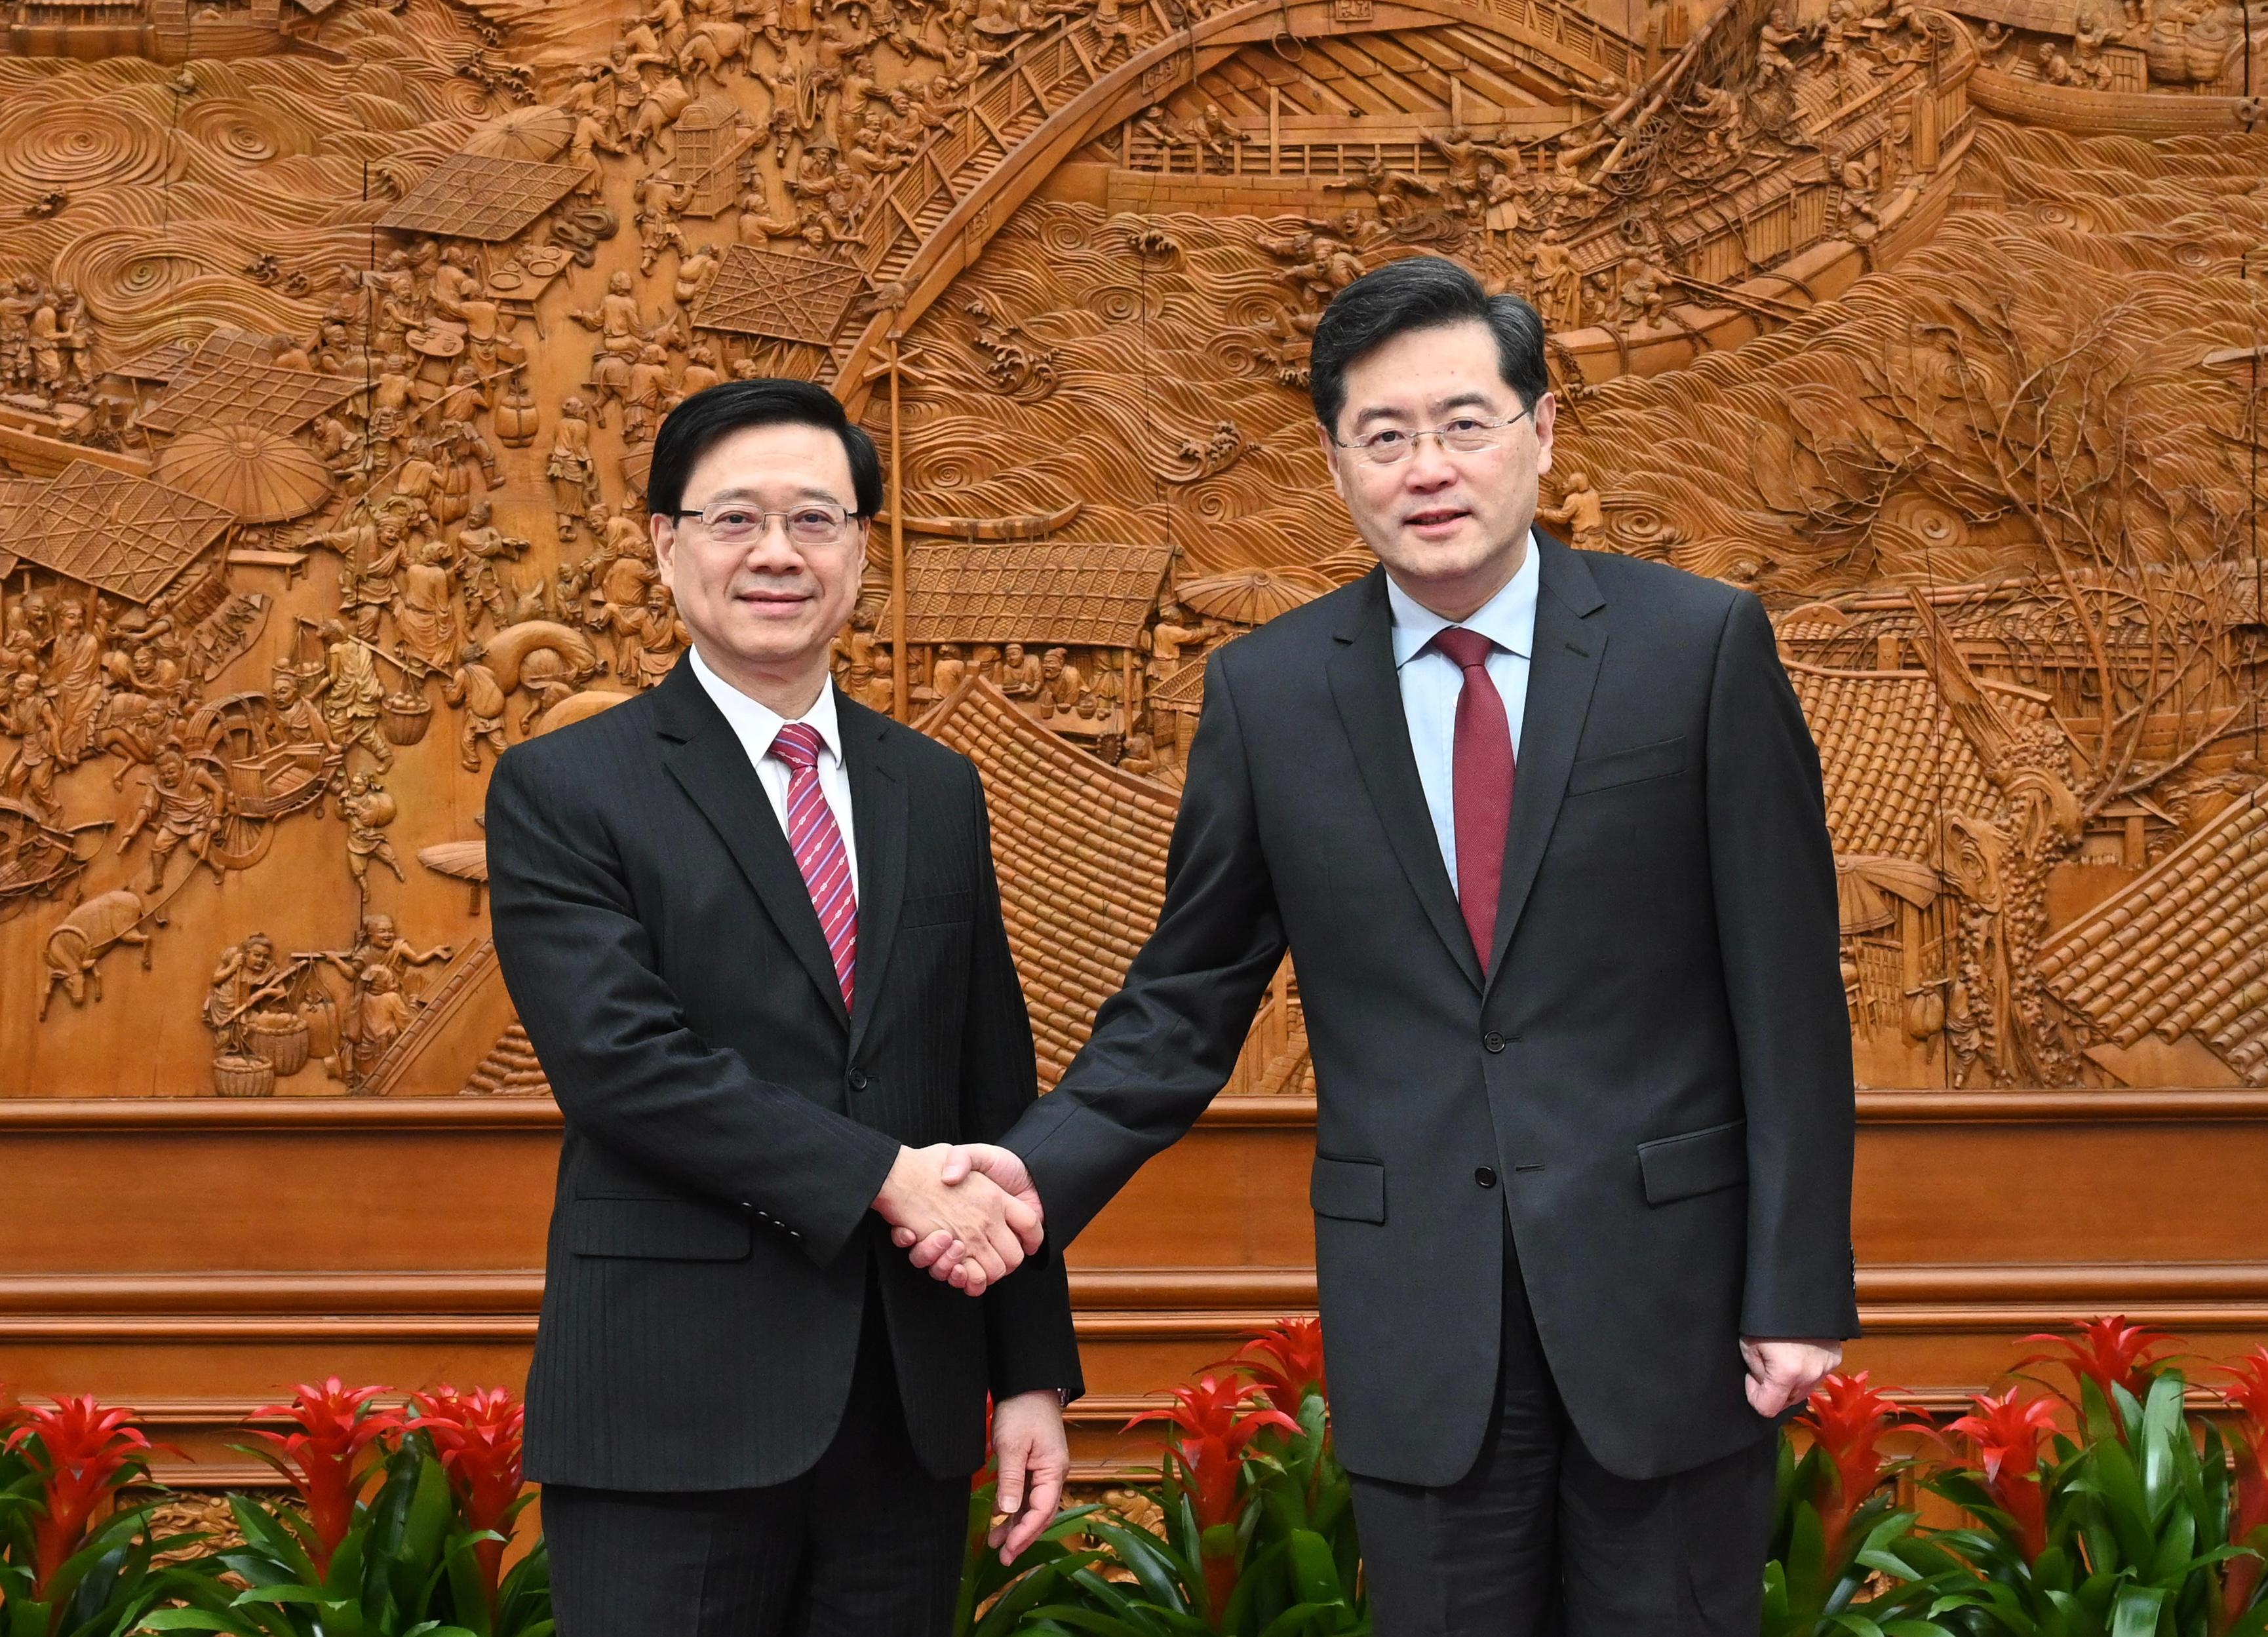 The Chief Executive, Mr John Lee (left), meets with State Councillor and Minister of Foreign Affairs, Mr Qin Gang (right), in Beijing this morning (March 16).